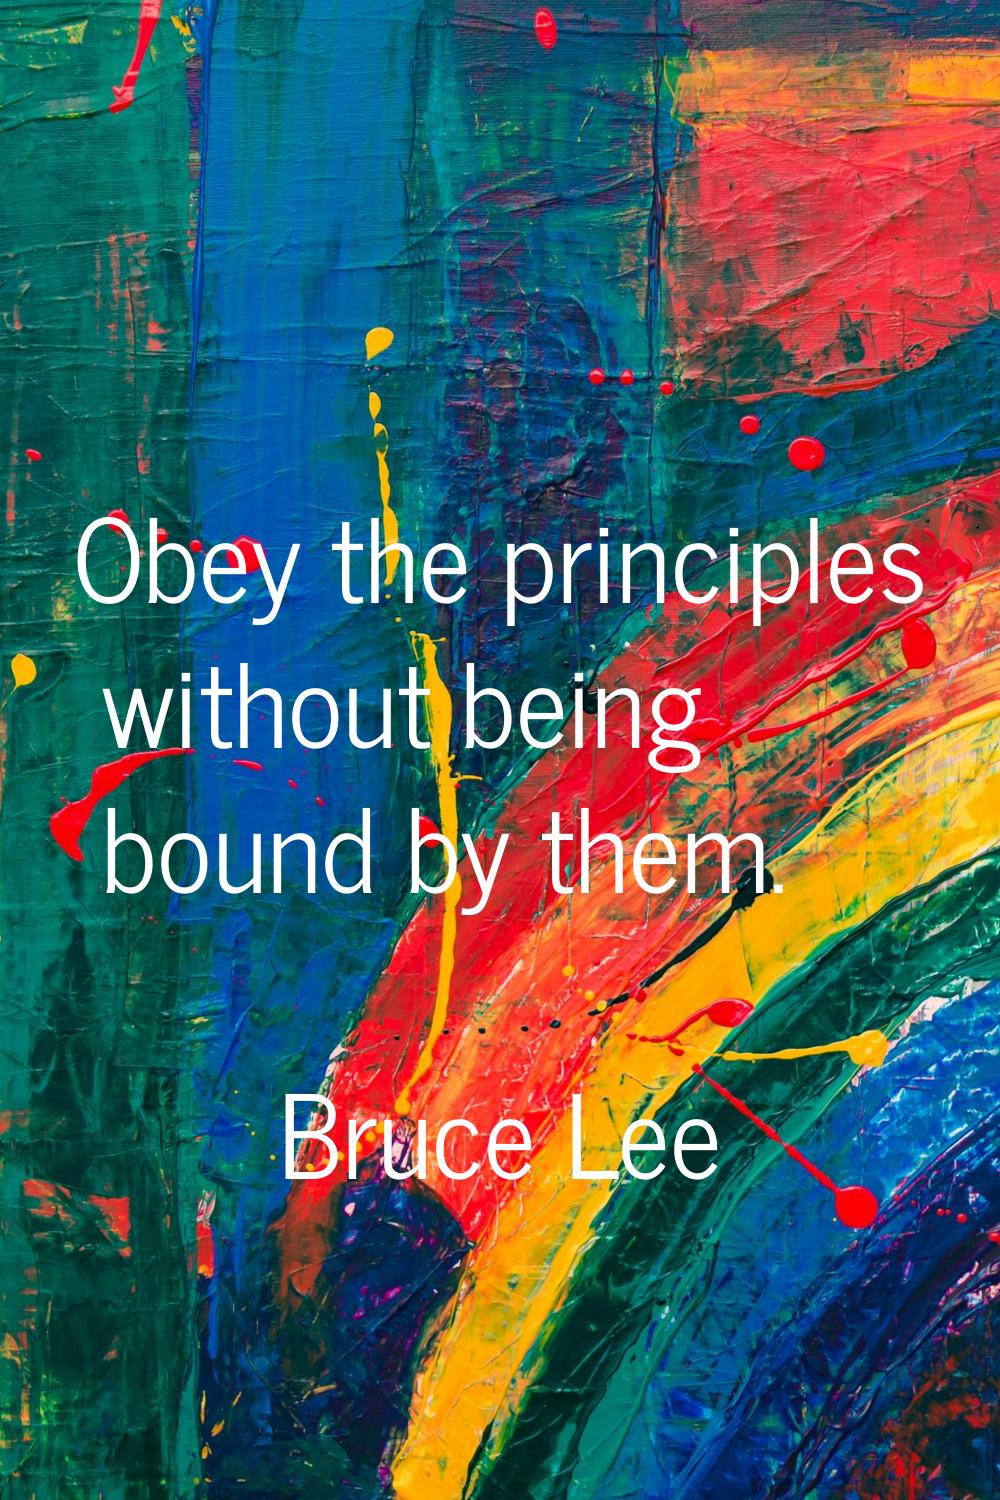 Obey the principles without being bound by them.